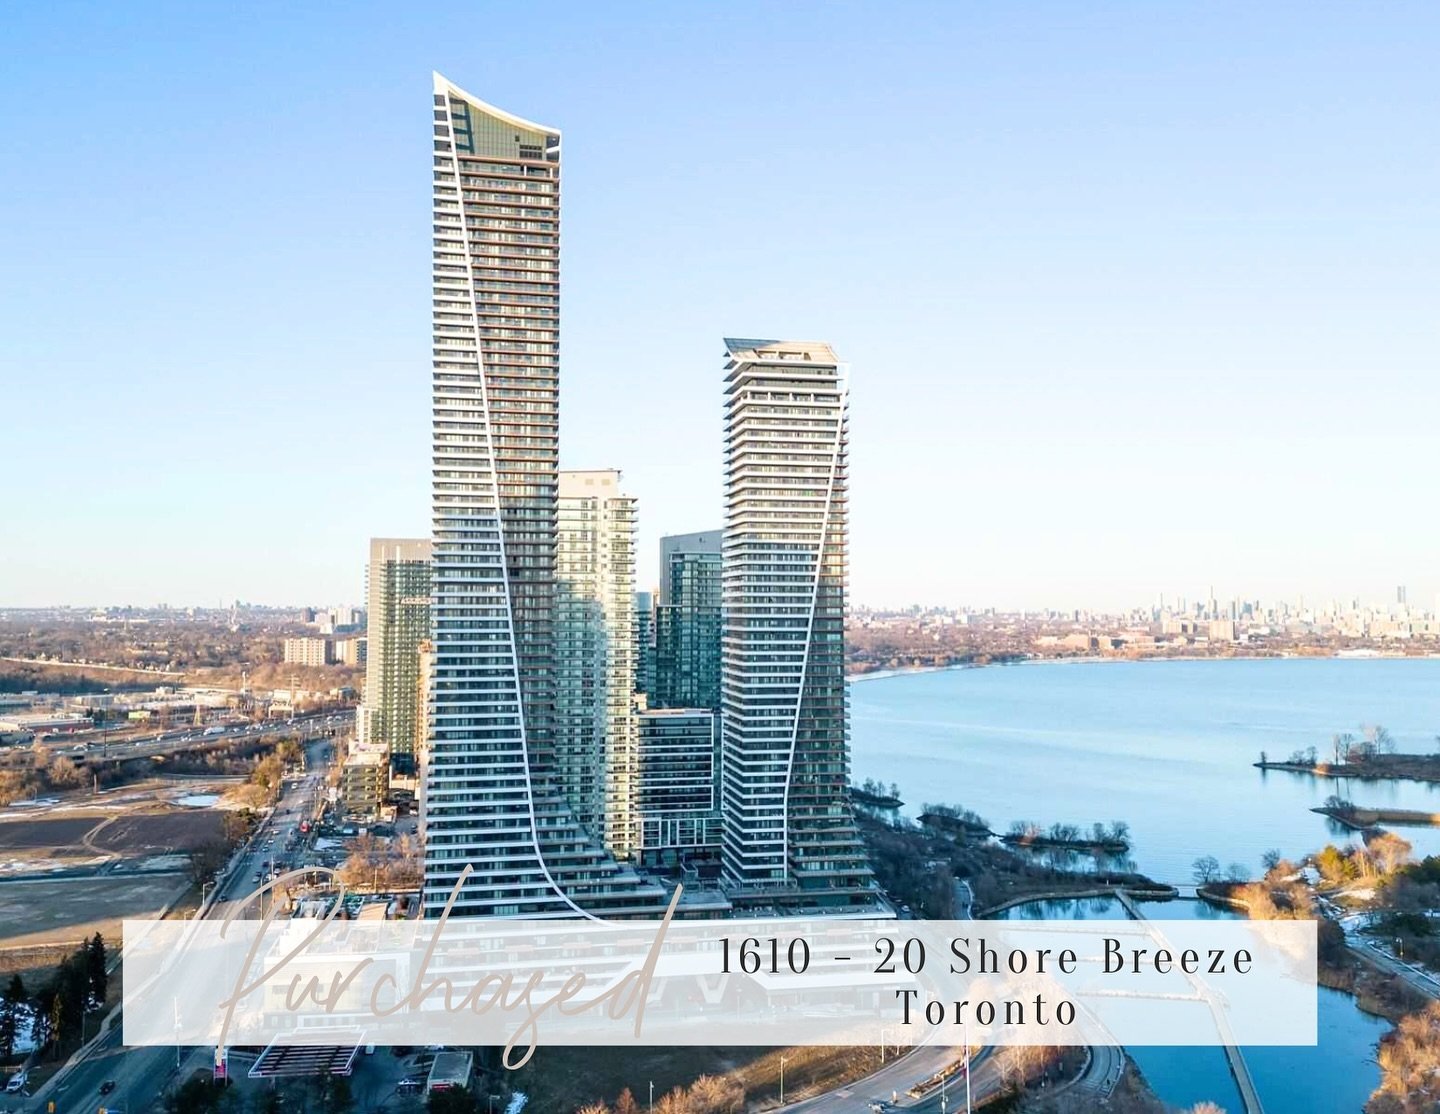 Change can be both daunting and exciting, especially when it comes to finding a new place to call home! But when your new home has a huge wrap around balcony that overlooks the lake and has direct views of the Toronto skyline&hellip;you know this cha